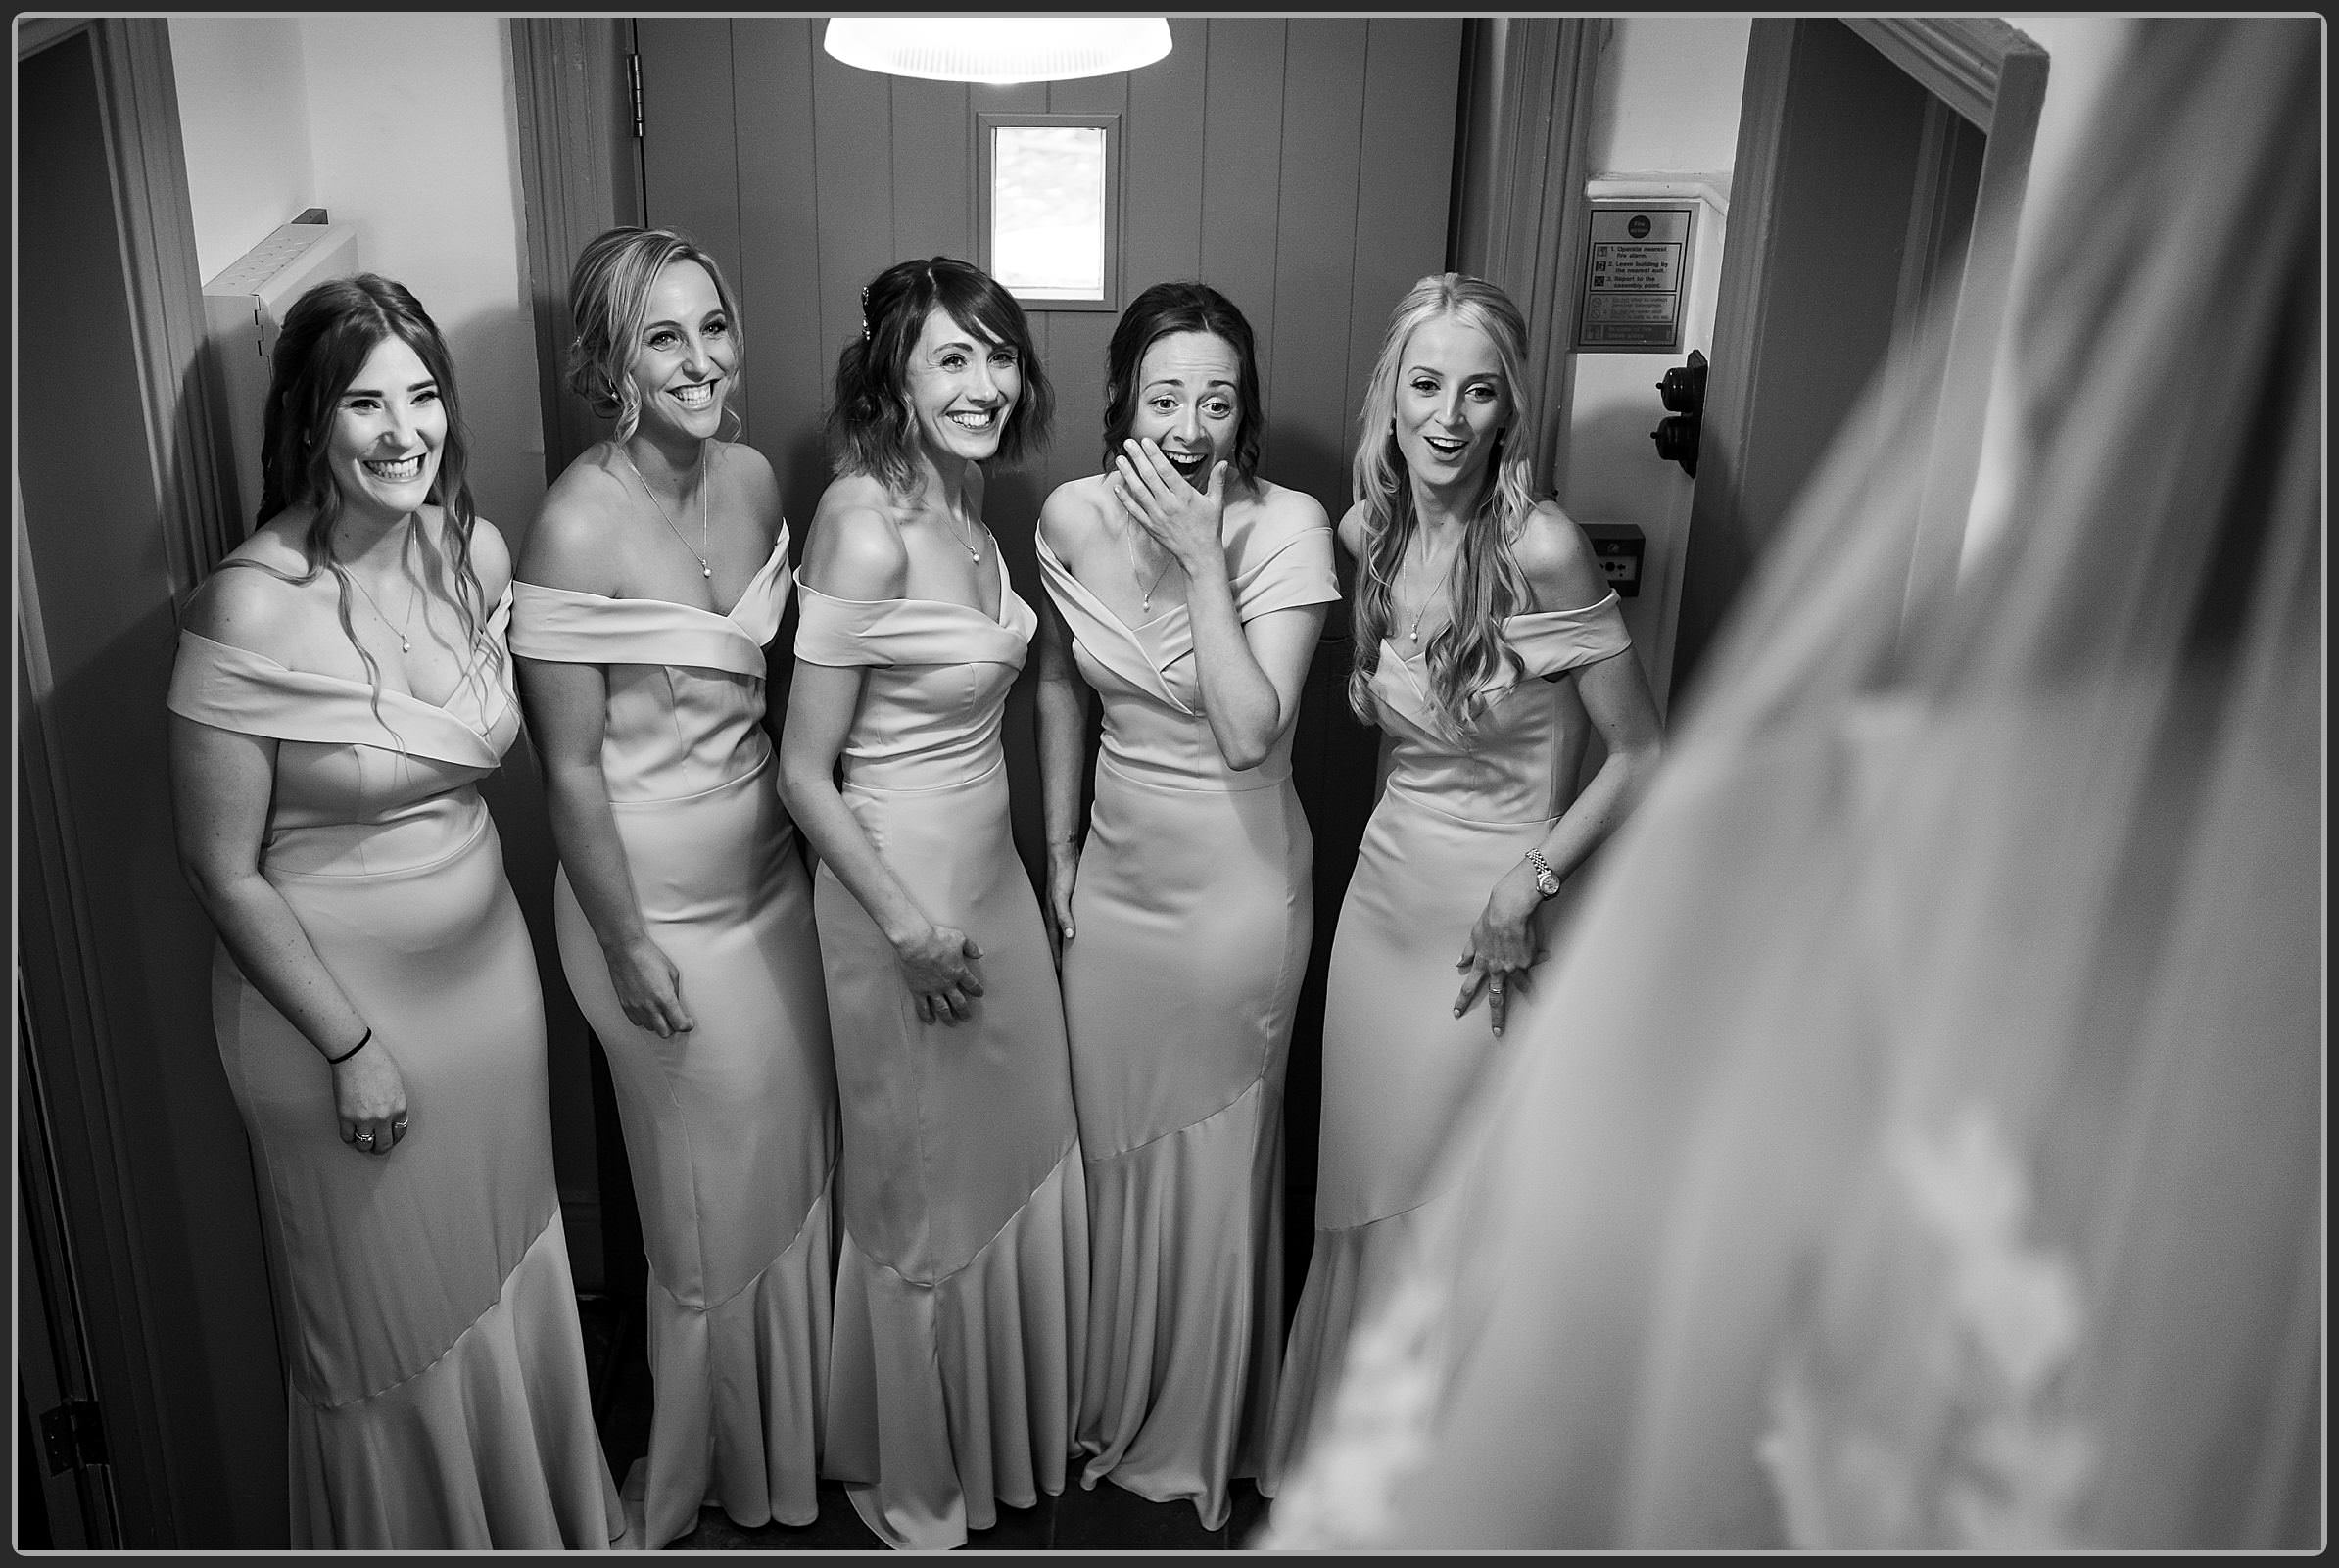 The bridesmaids seeing Ellie for the first time